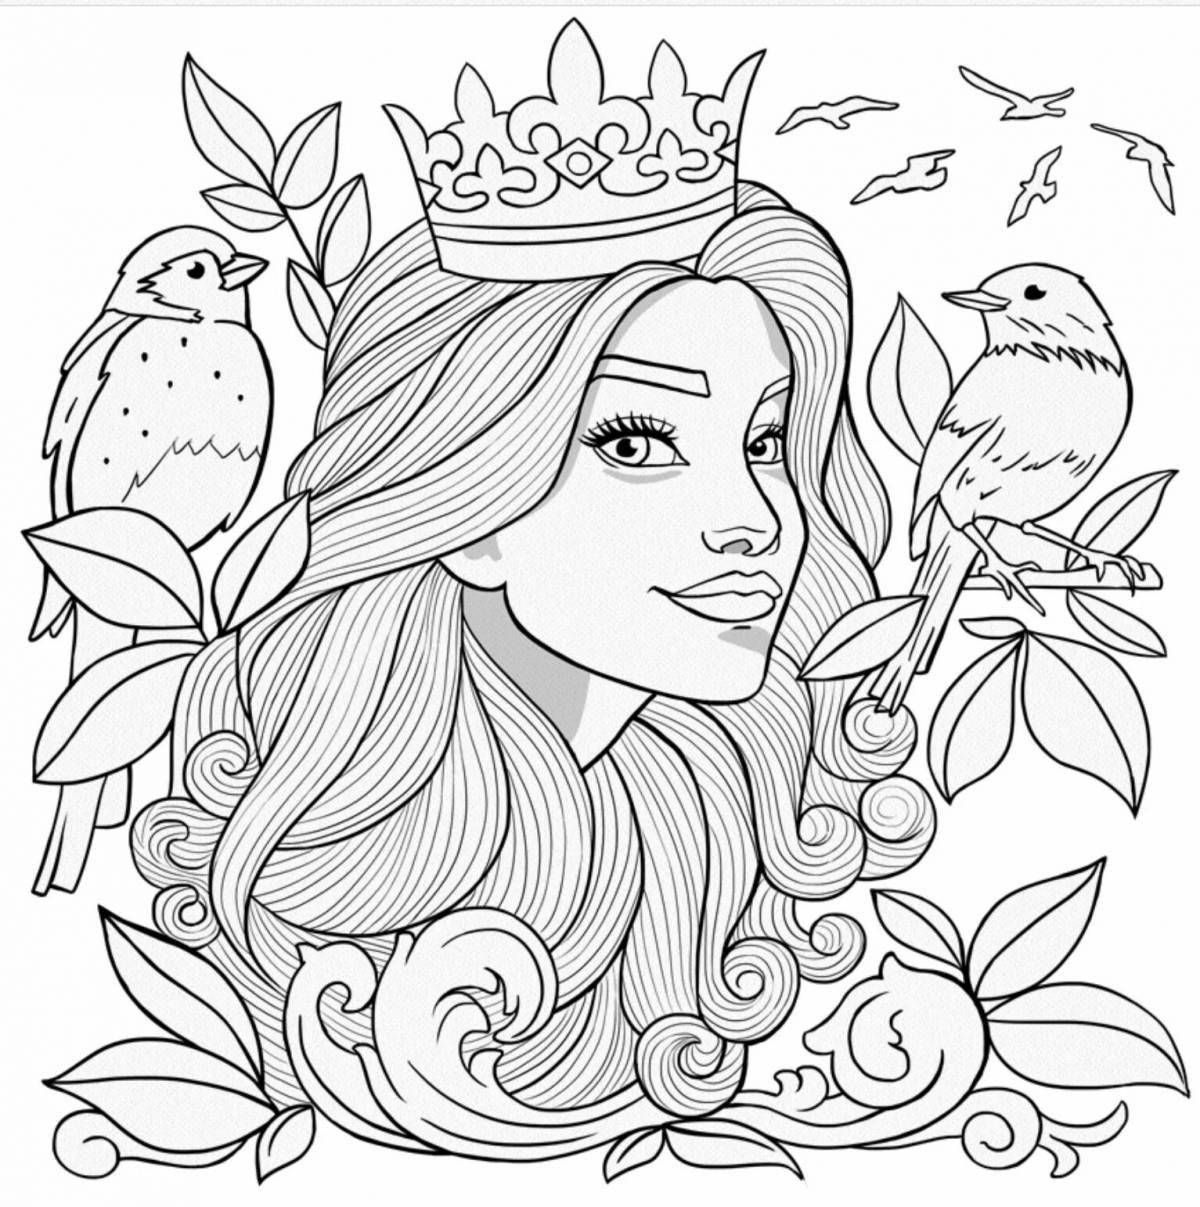 19 year old playful coloring page